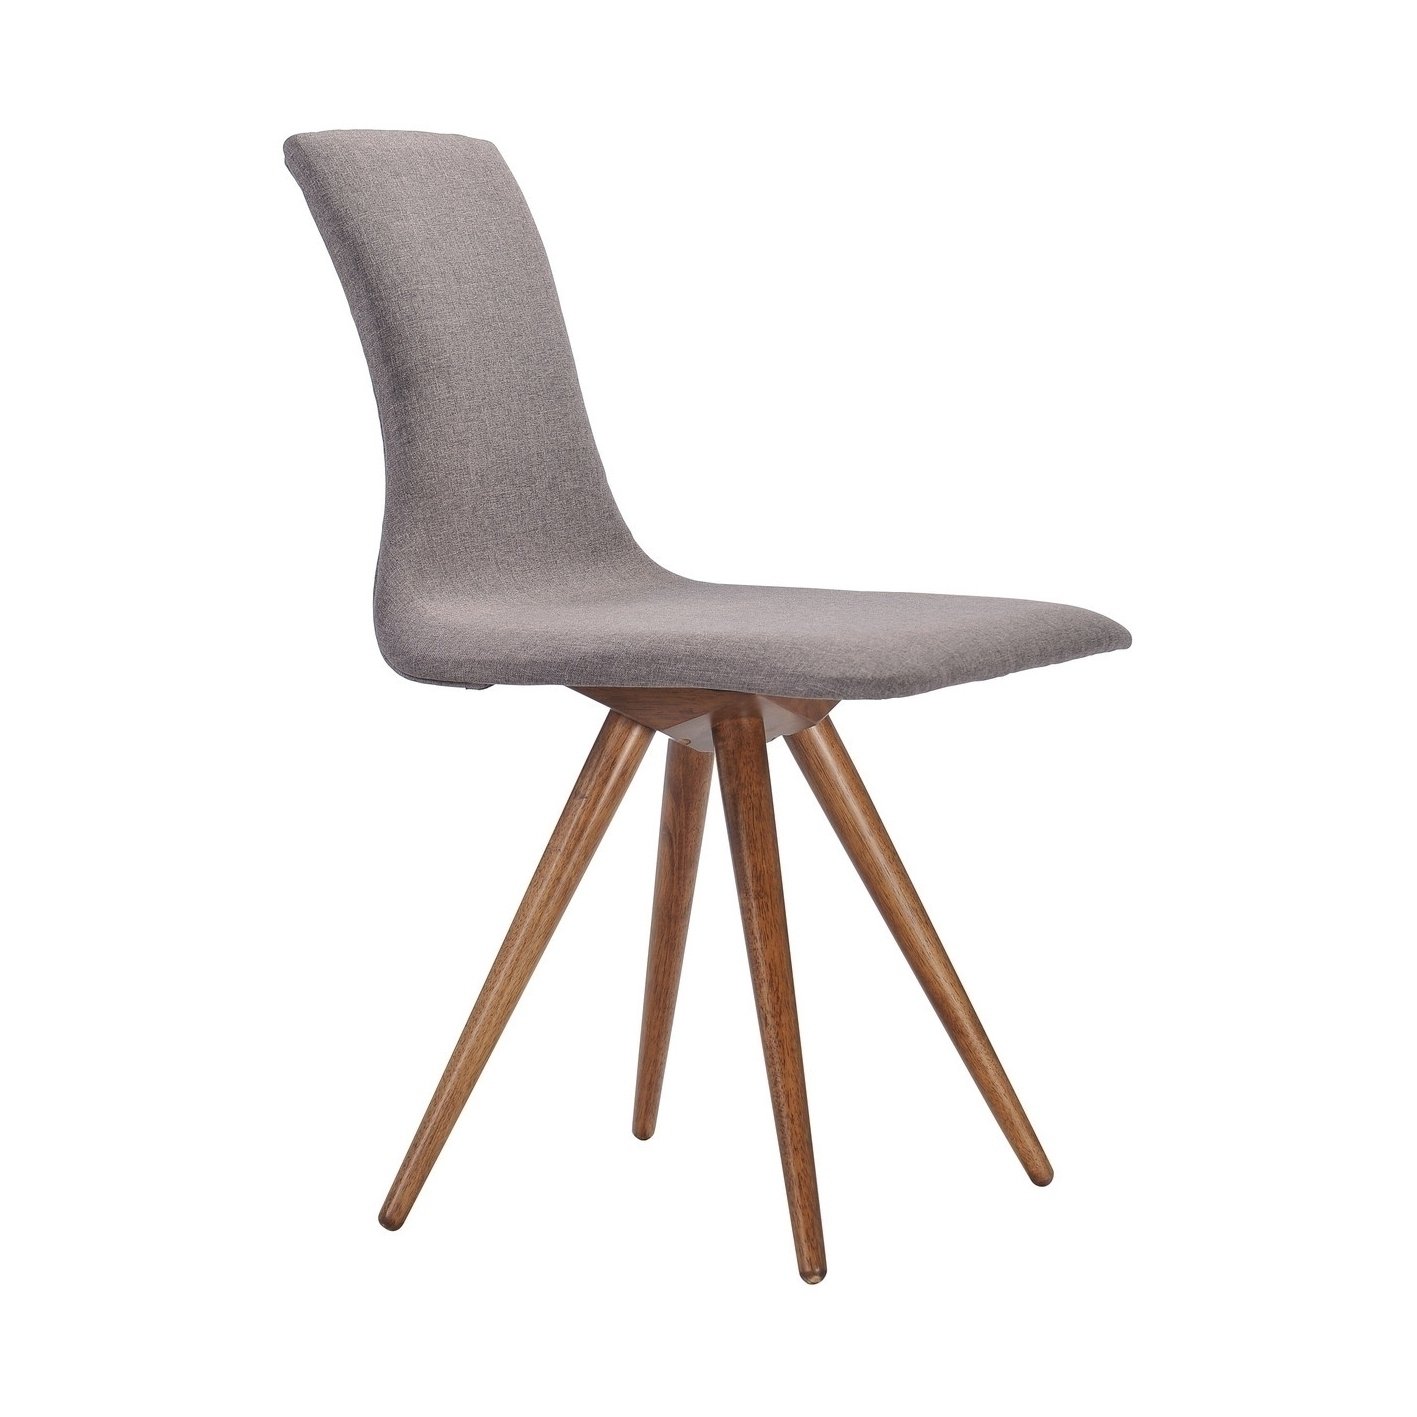 downtown dining chair - flint gray